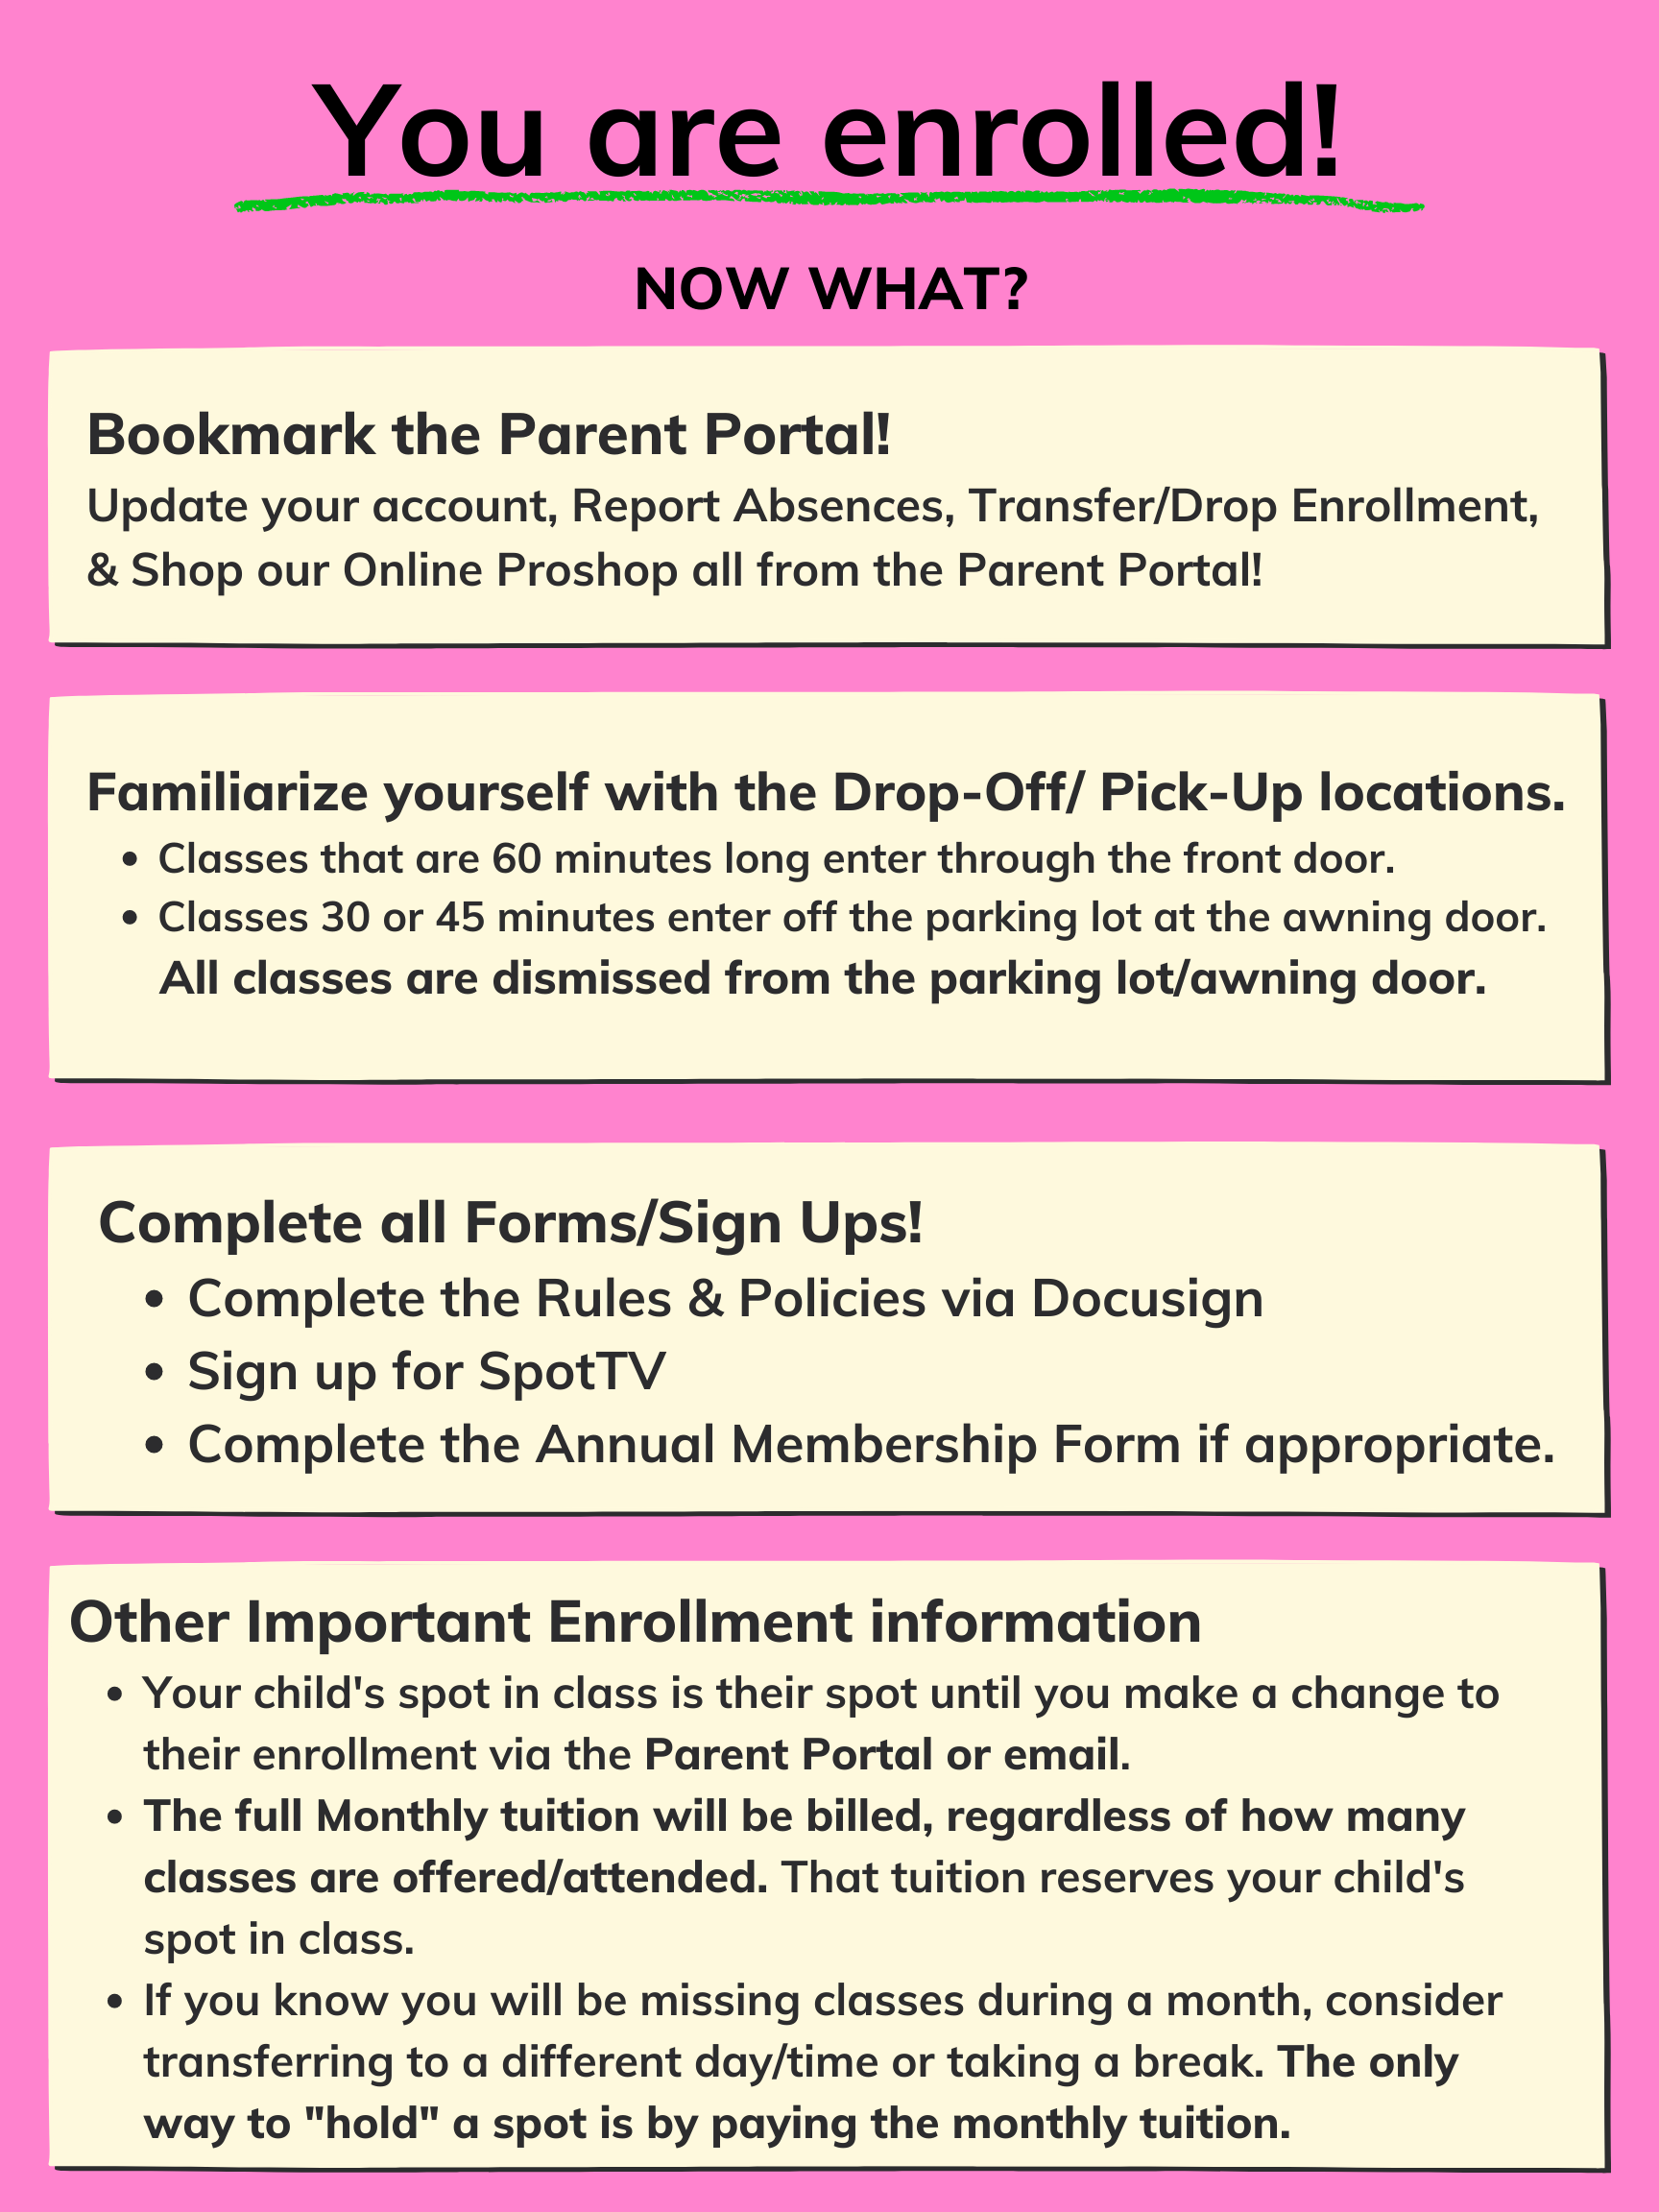 Things Parents Need to Know